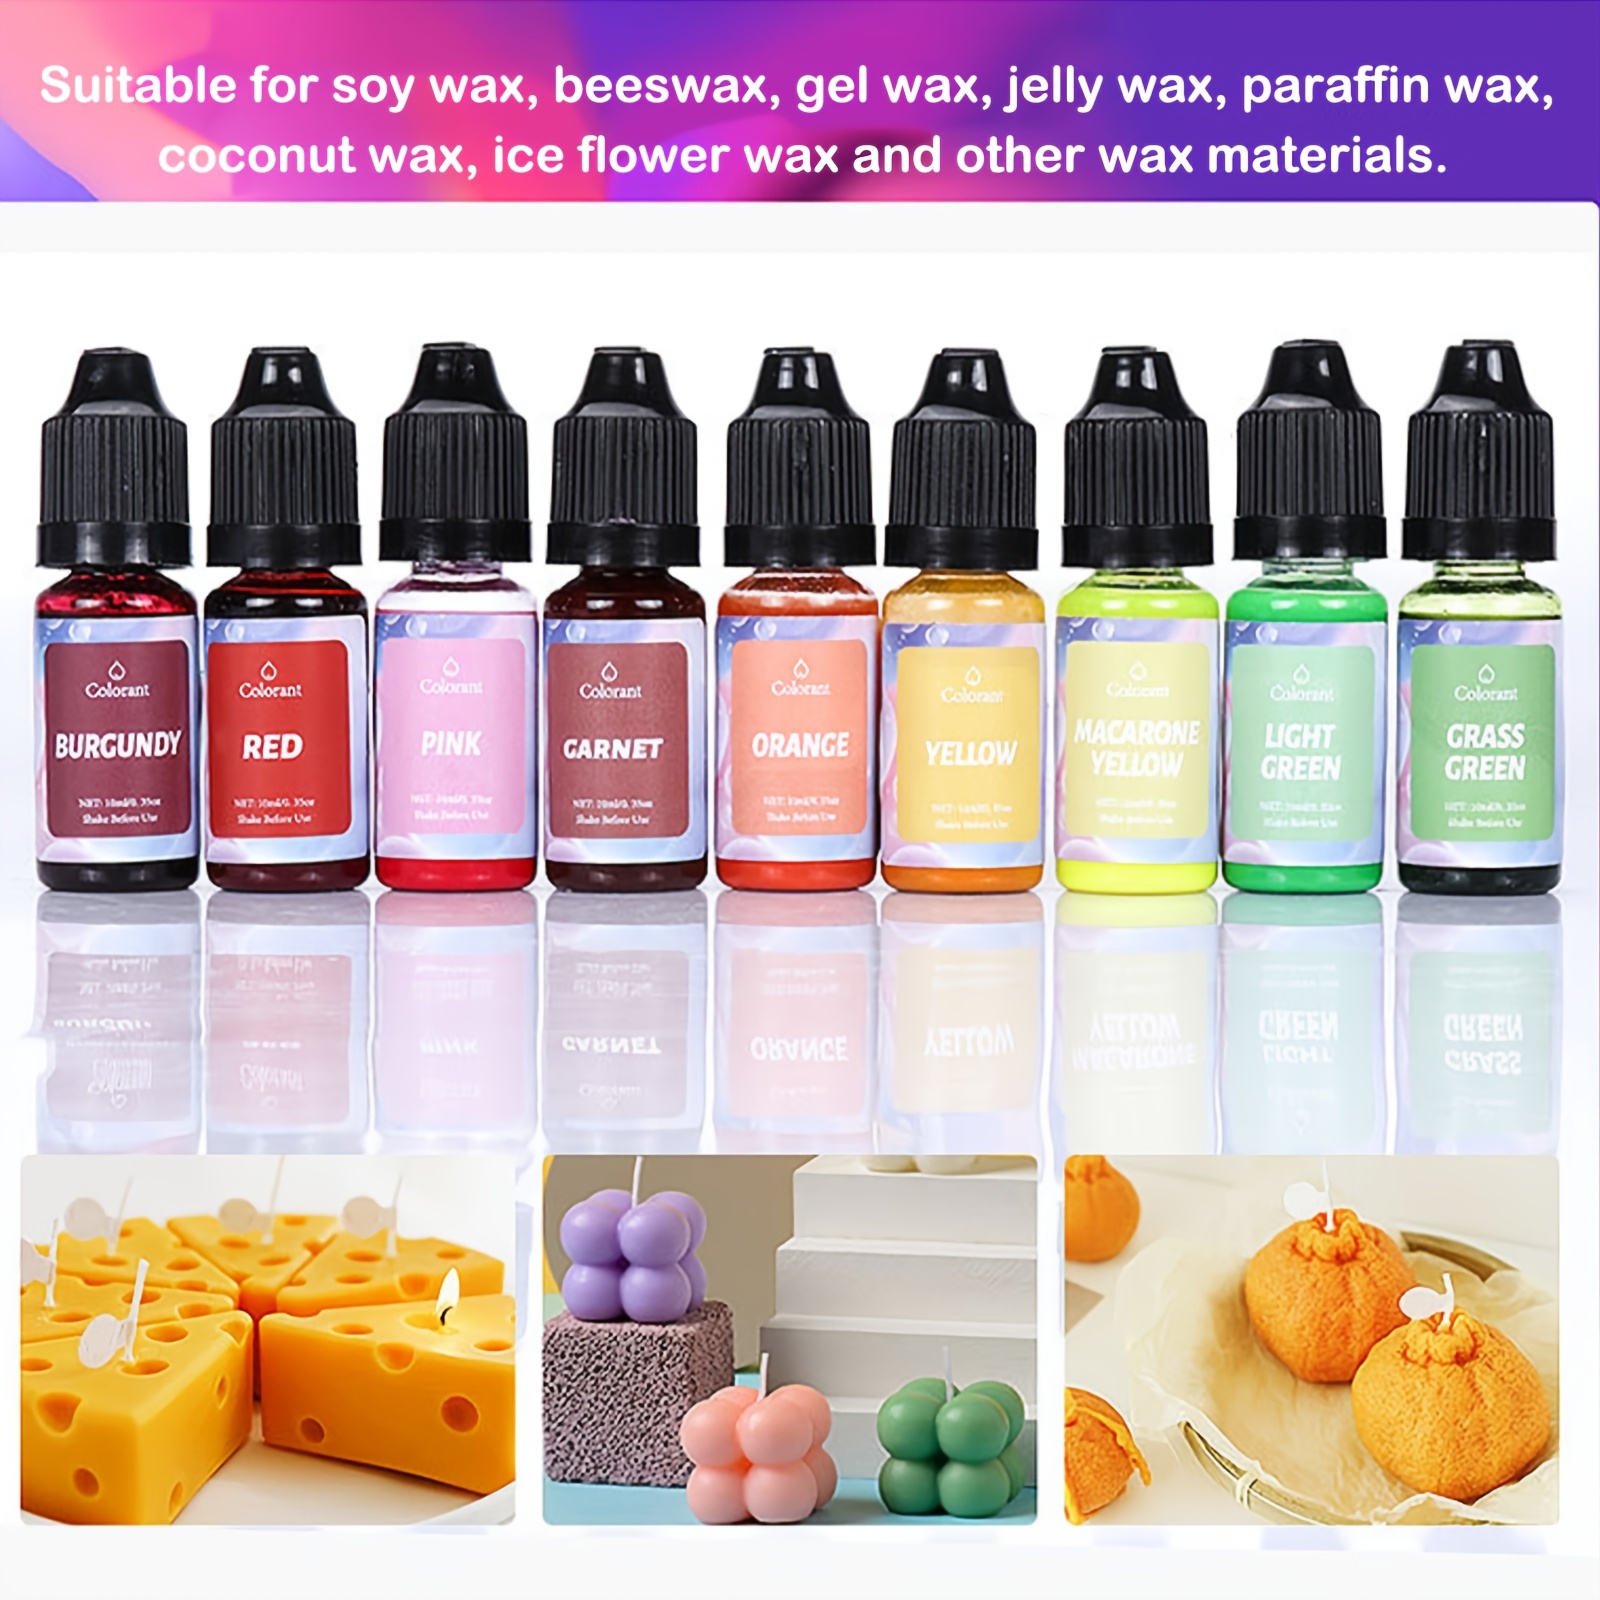  Candle Dye - 21 Colors Wax Melt Dye for Candle Making,  Oil-Based Dye for Wax, Highly Concentrate Liquid Candle Color Dye